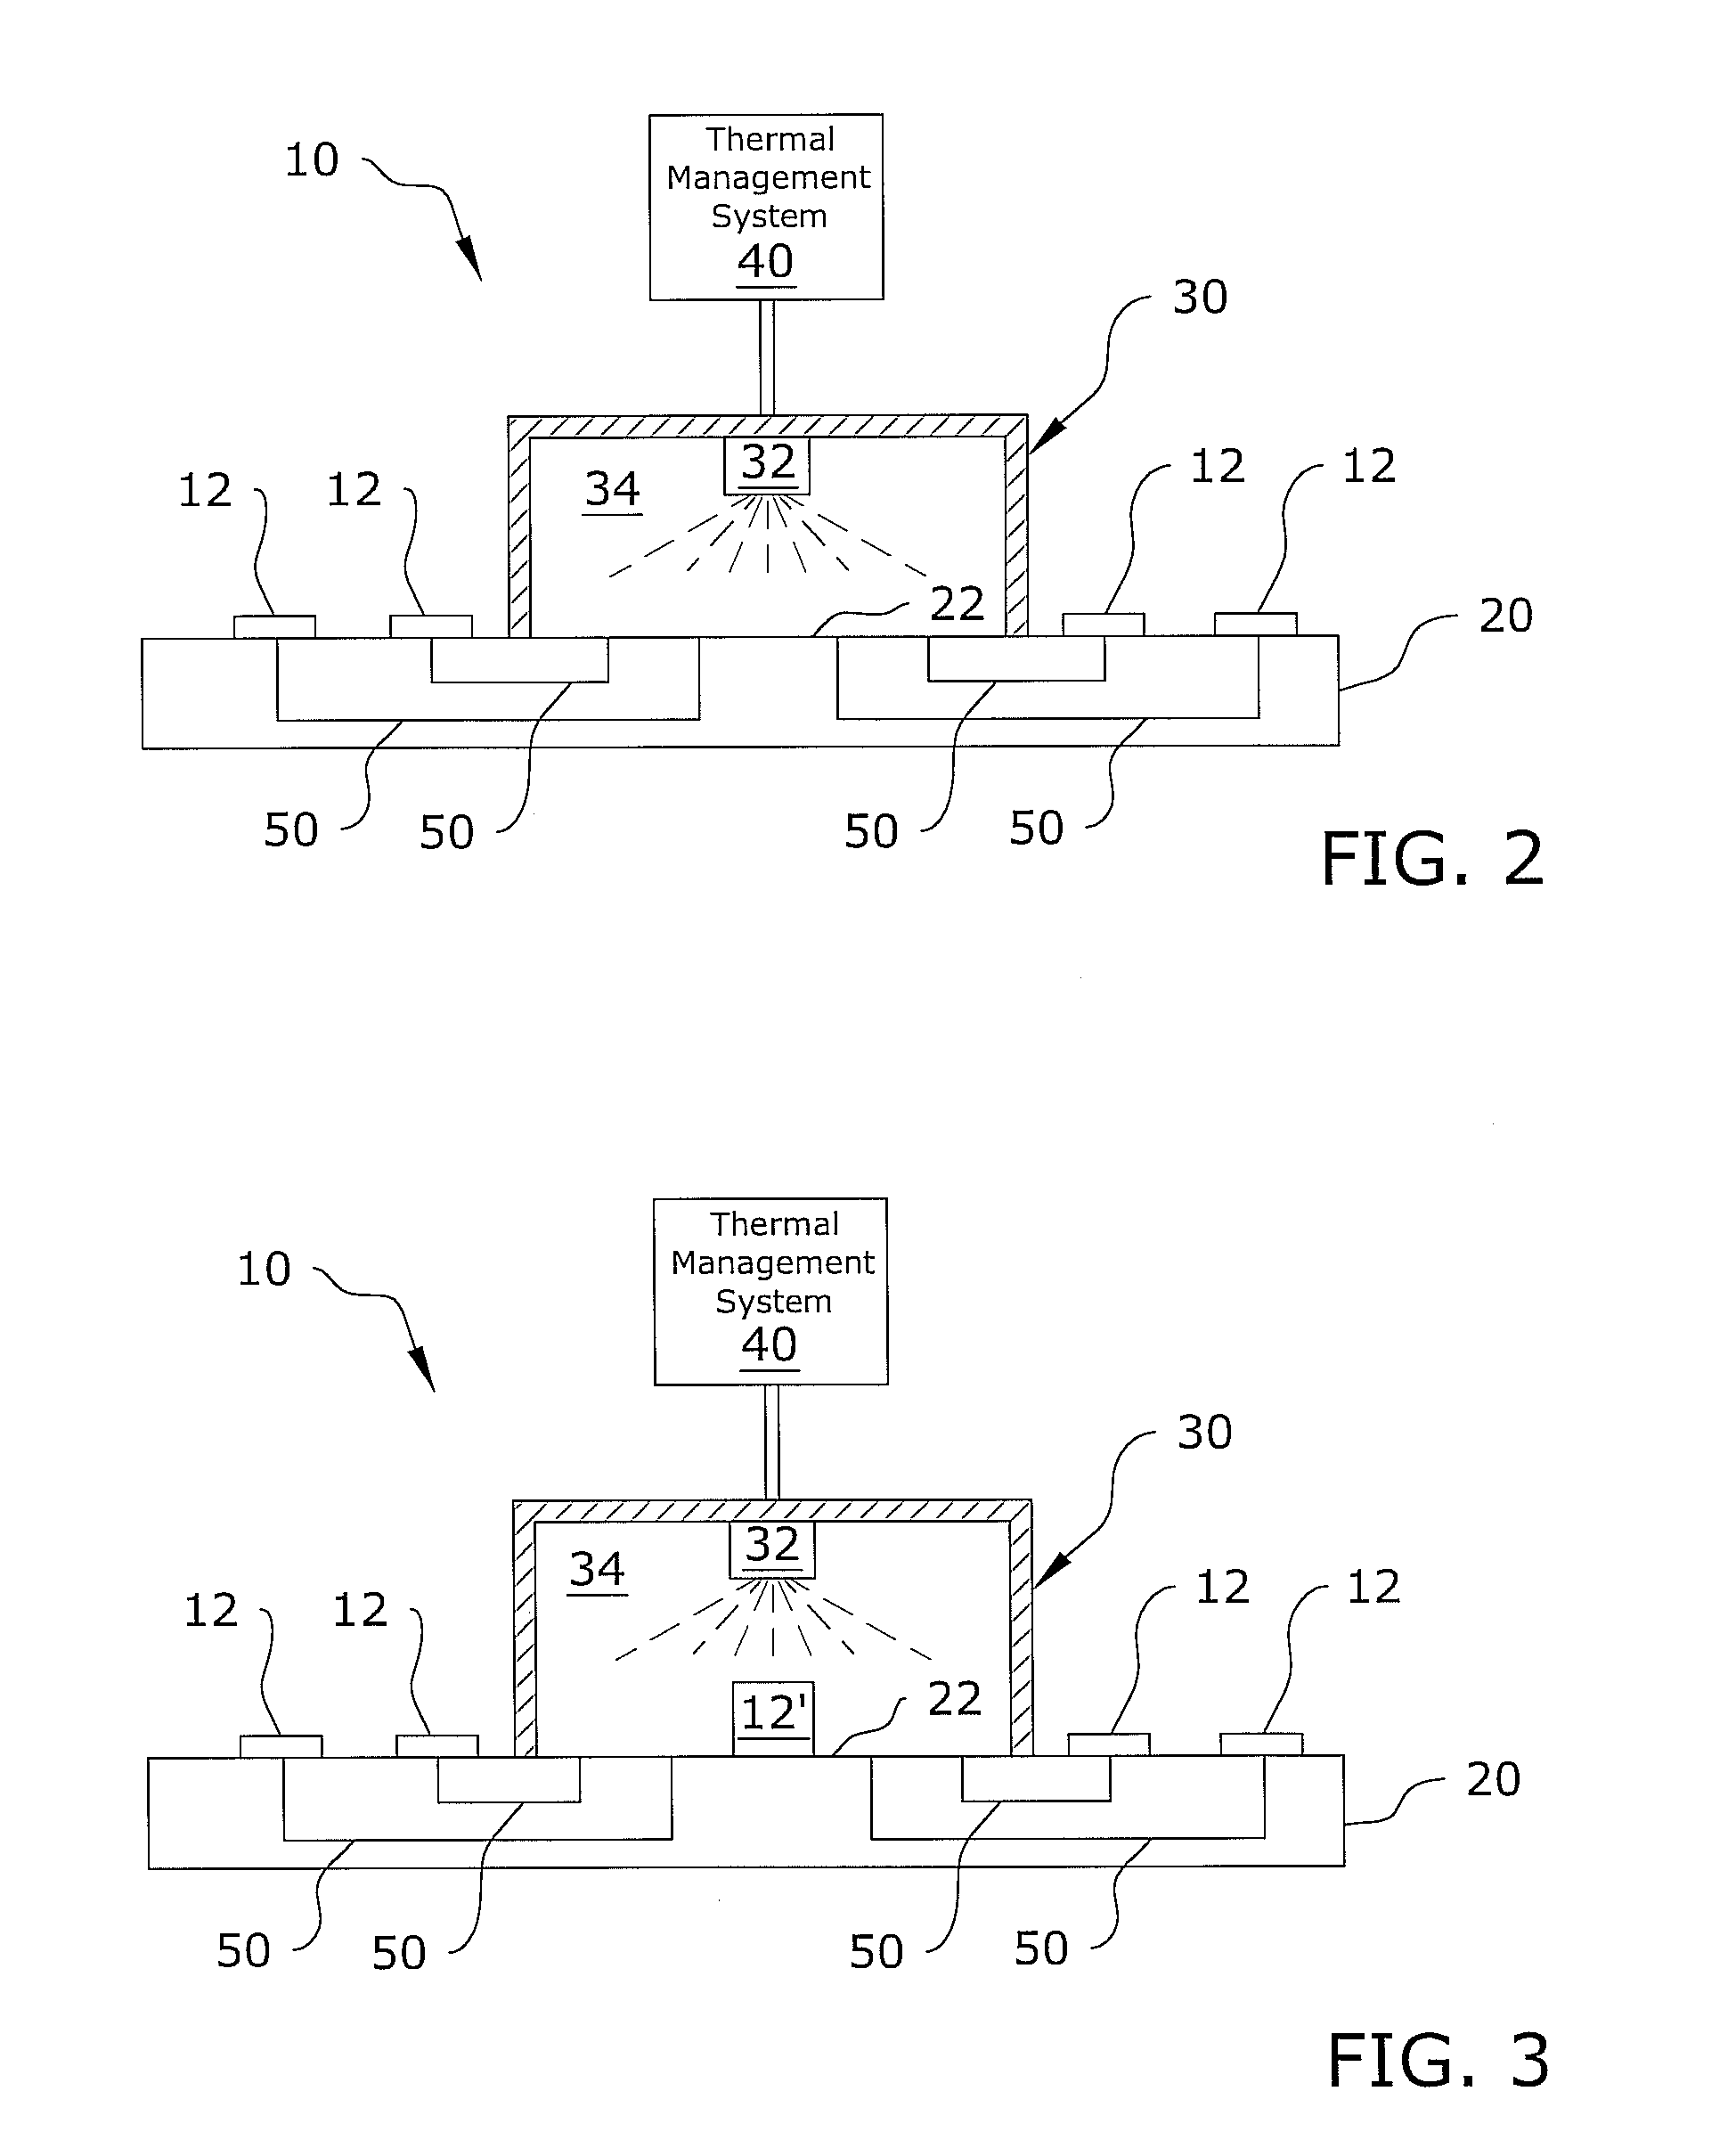 Localized thermal management system